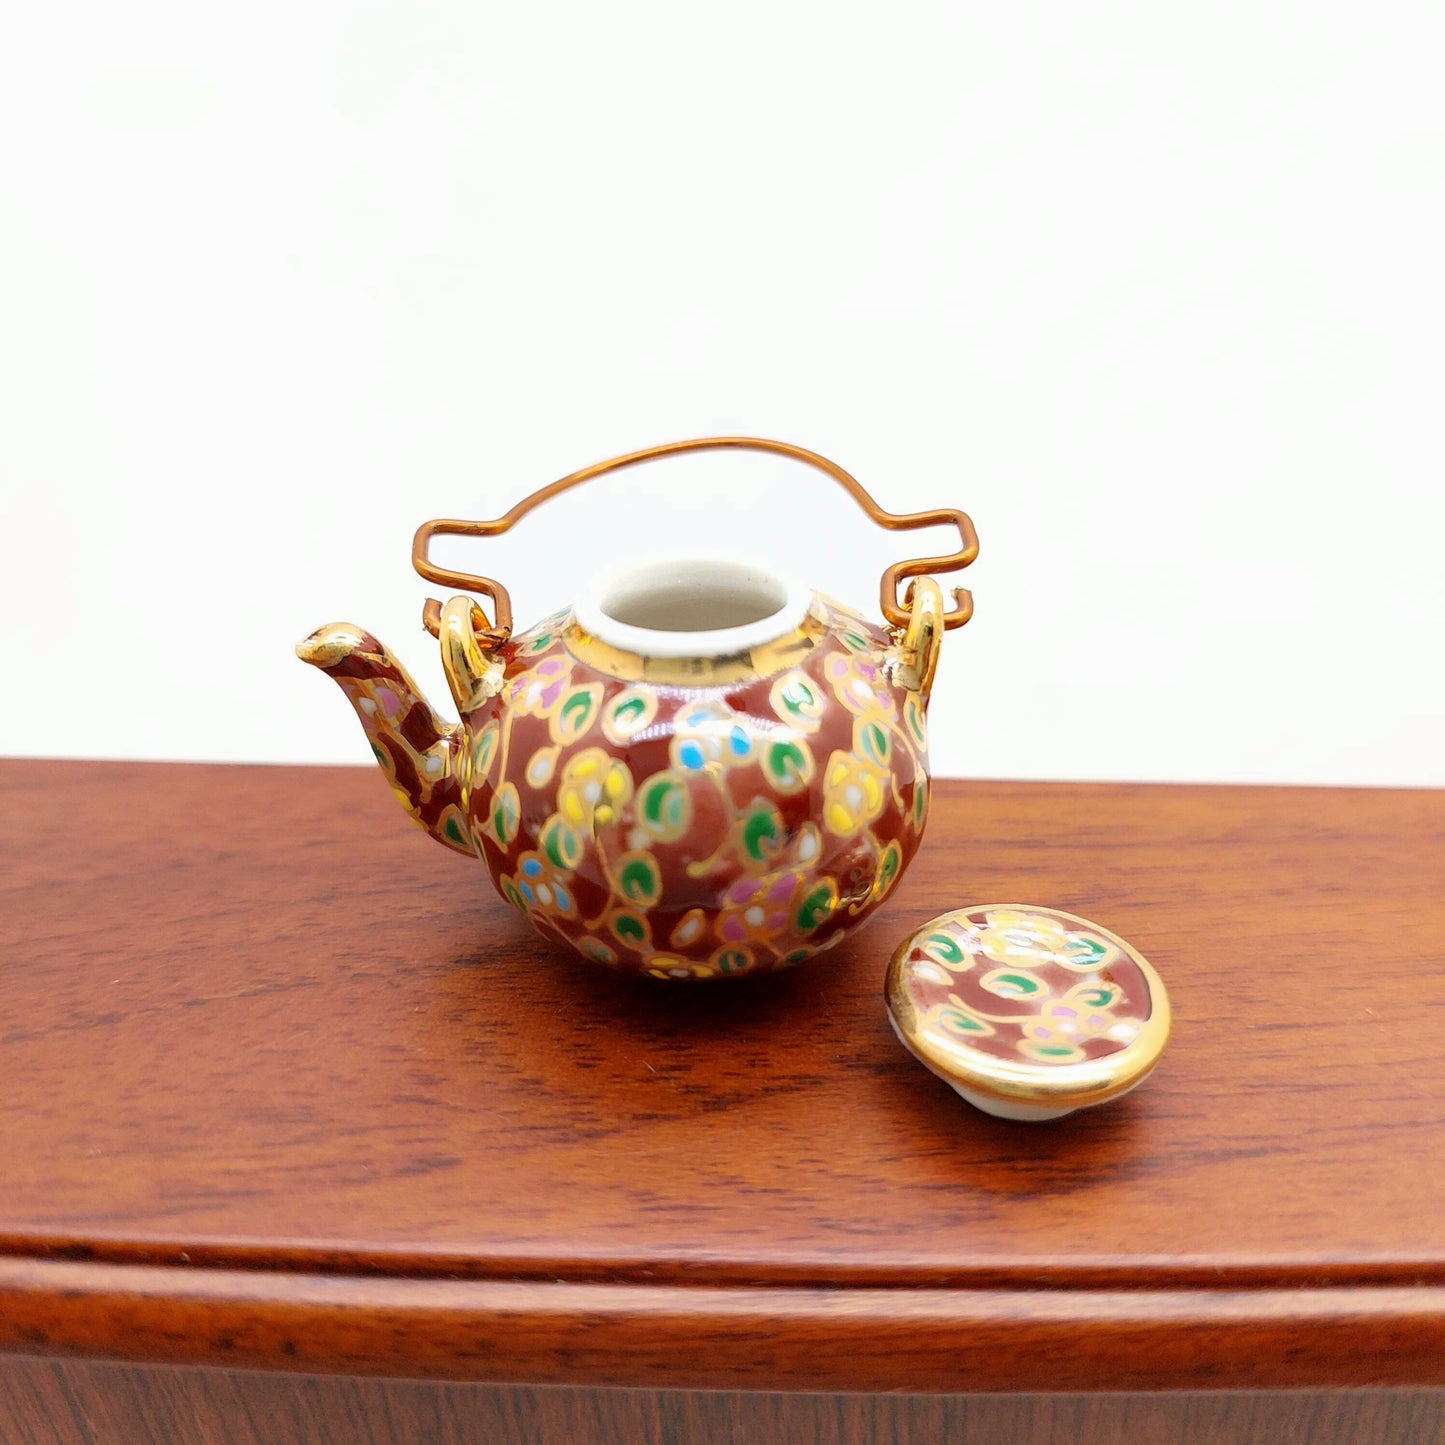 Ceramic Porcelain Miniature Chinese Teapot with Copper Handle, Benjarong patterns Golden Dots, Dollhouse Decoration, Gift for Teapot Lovers